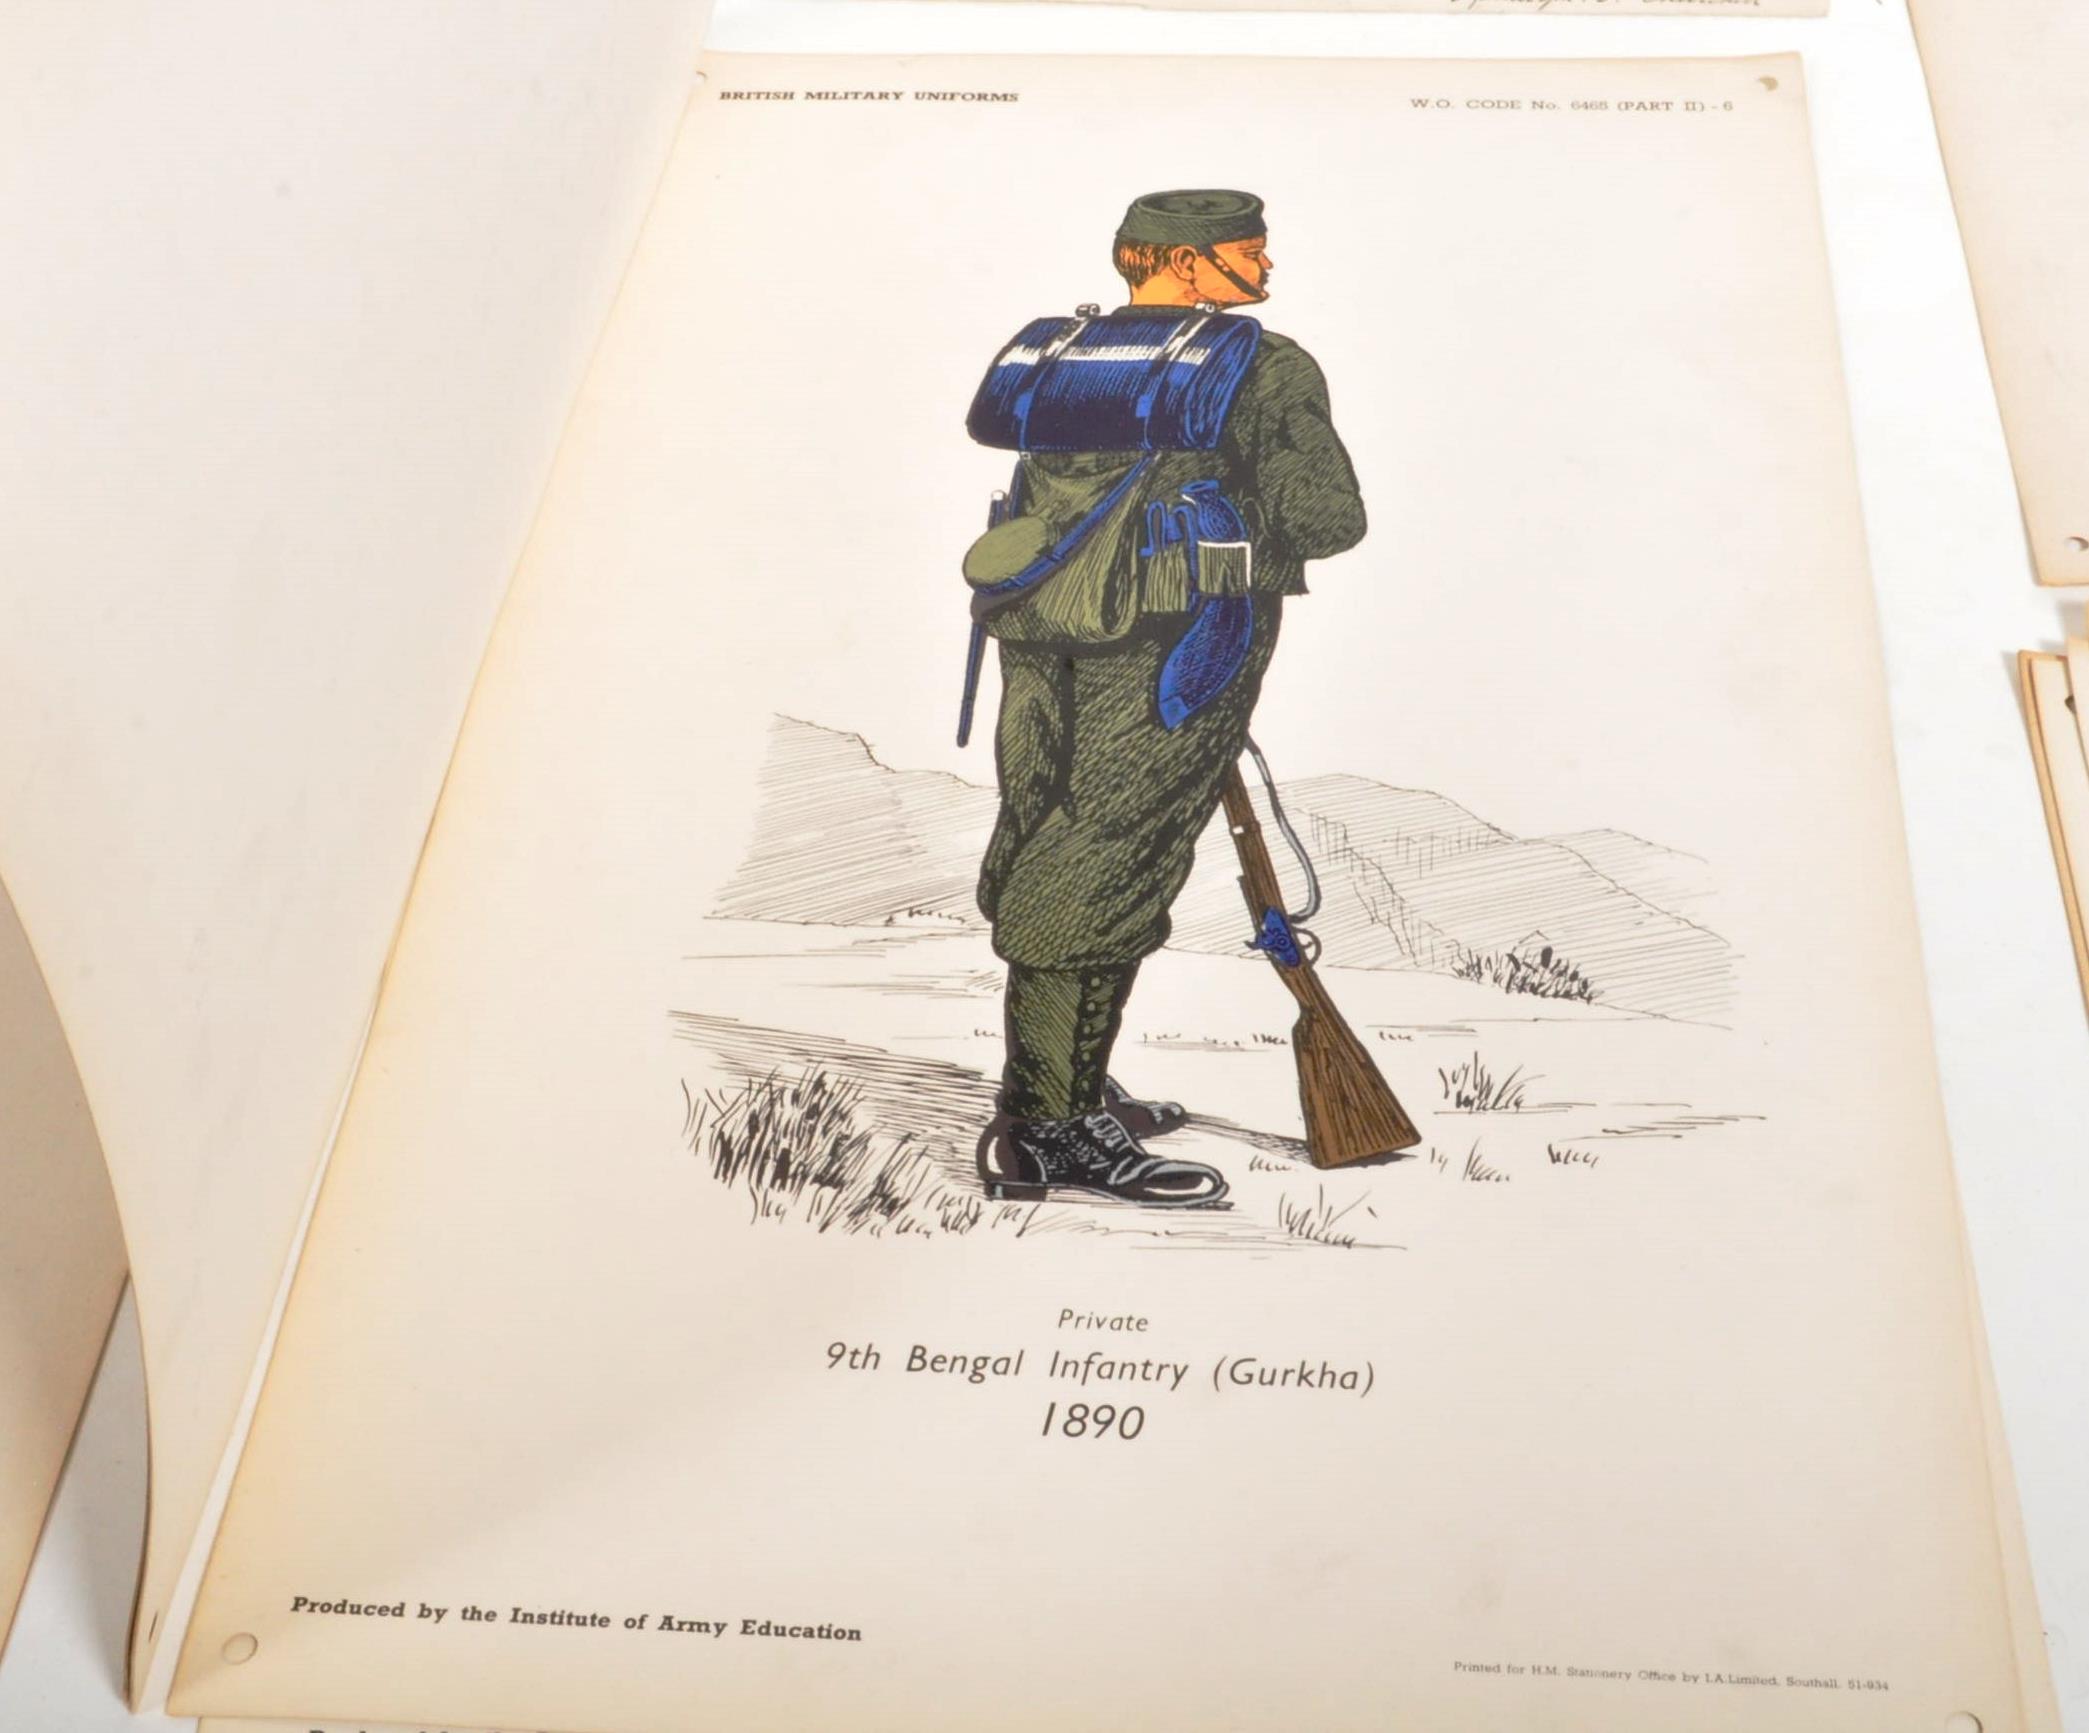 BRITISH MILITARY UNIFORMS - ARMY EDUCATION PRINTS - Image 8 of 8